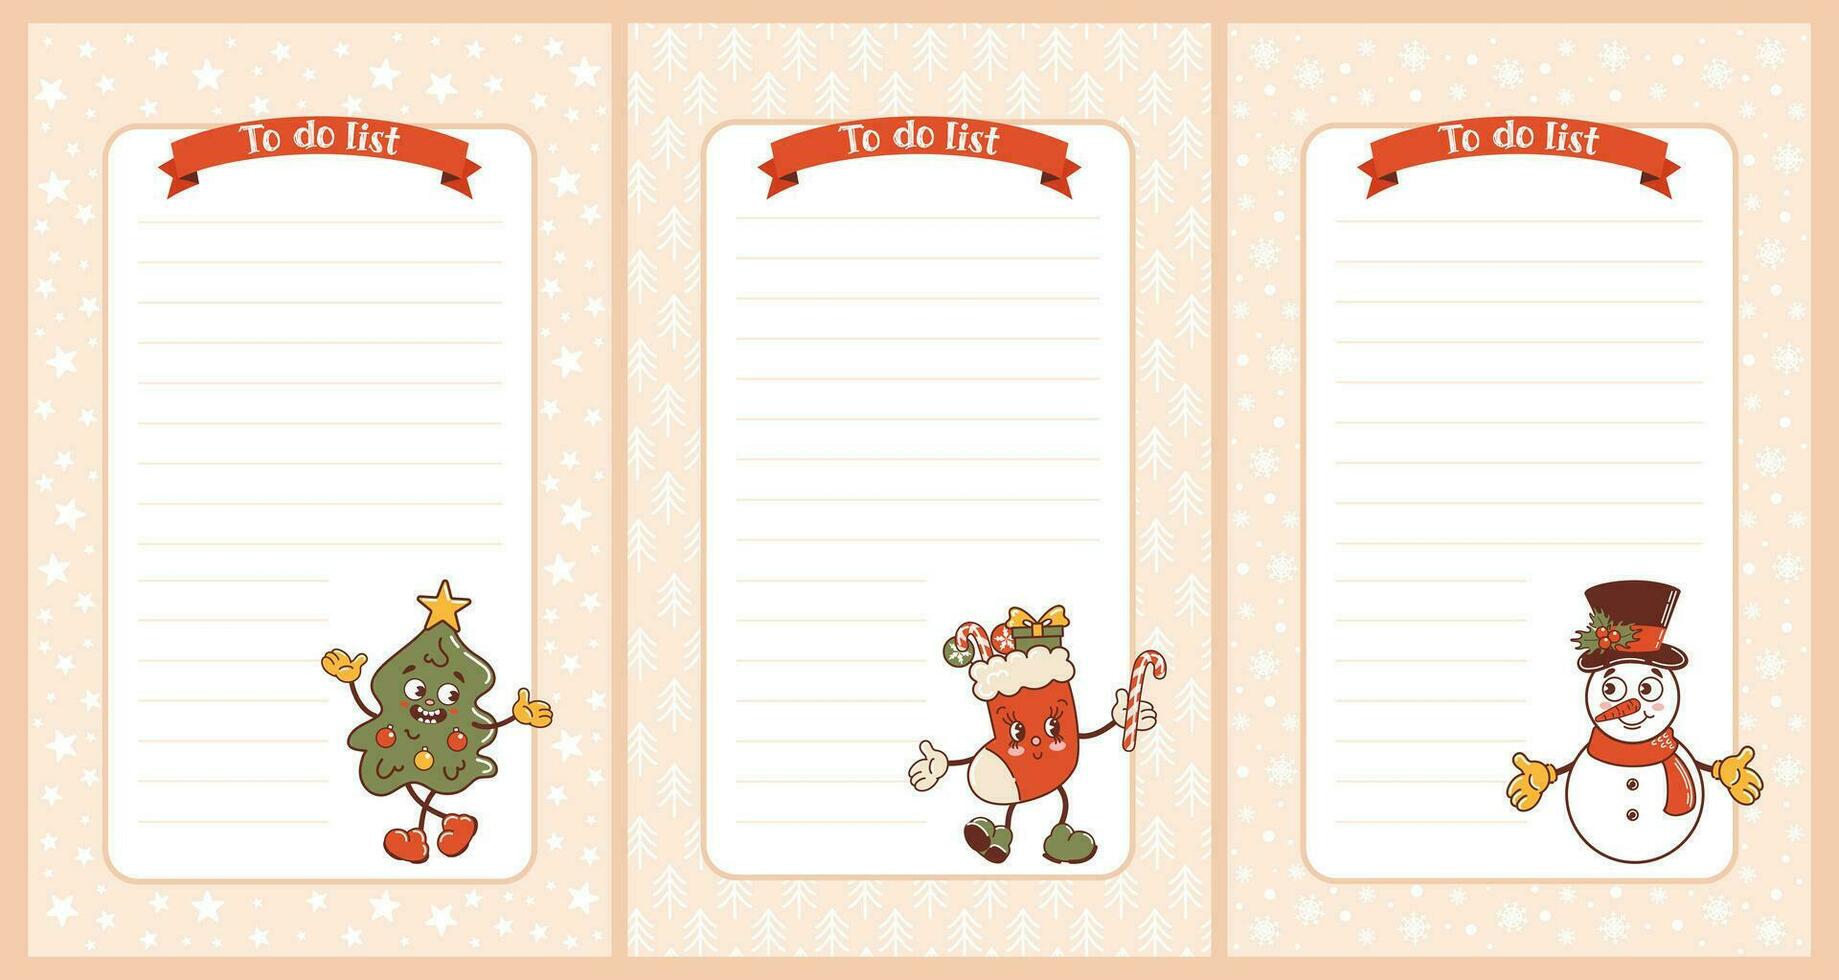 Set of Christmas templates. To-do list. Cute old retro cartoon style characters. Snowman, spruce, Christmas stocking. Notebook, weekly or daily planner for kids. vector